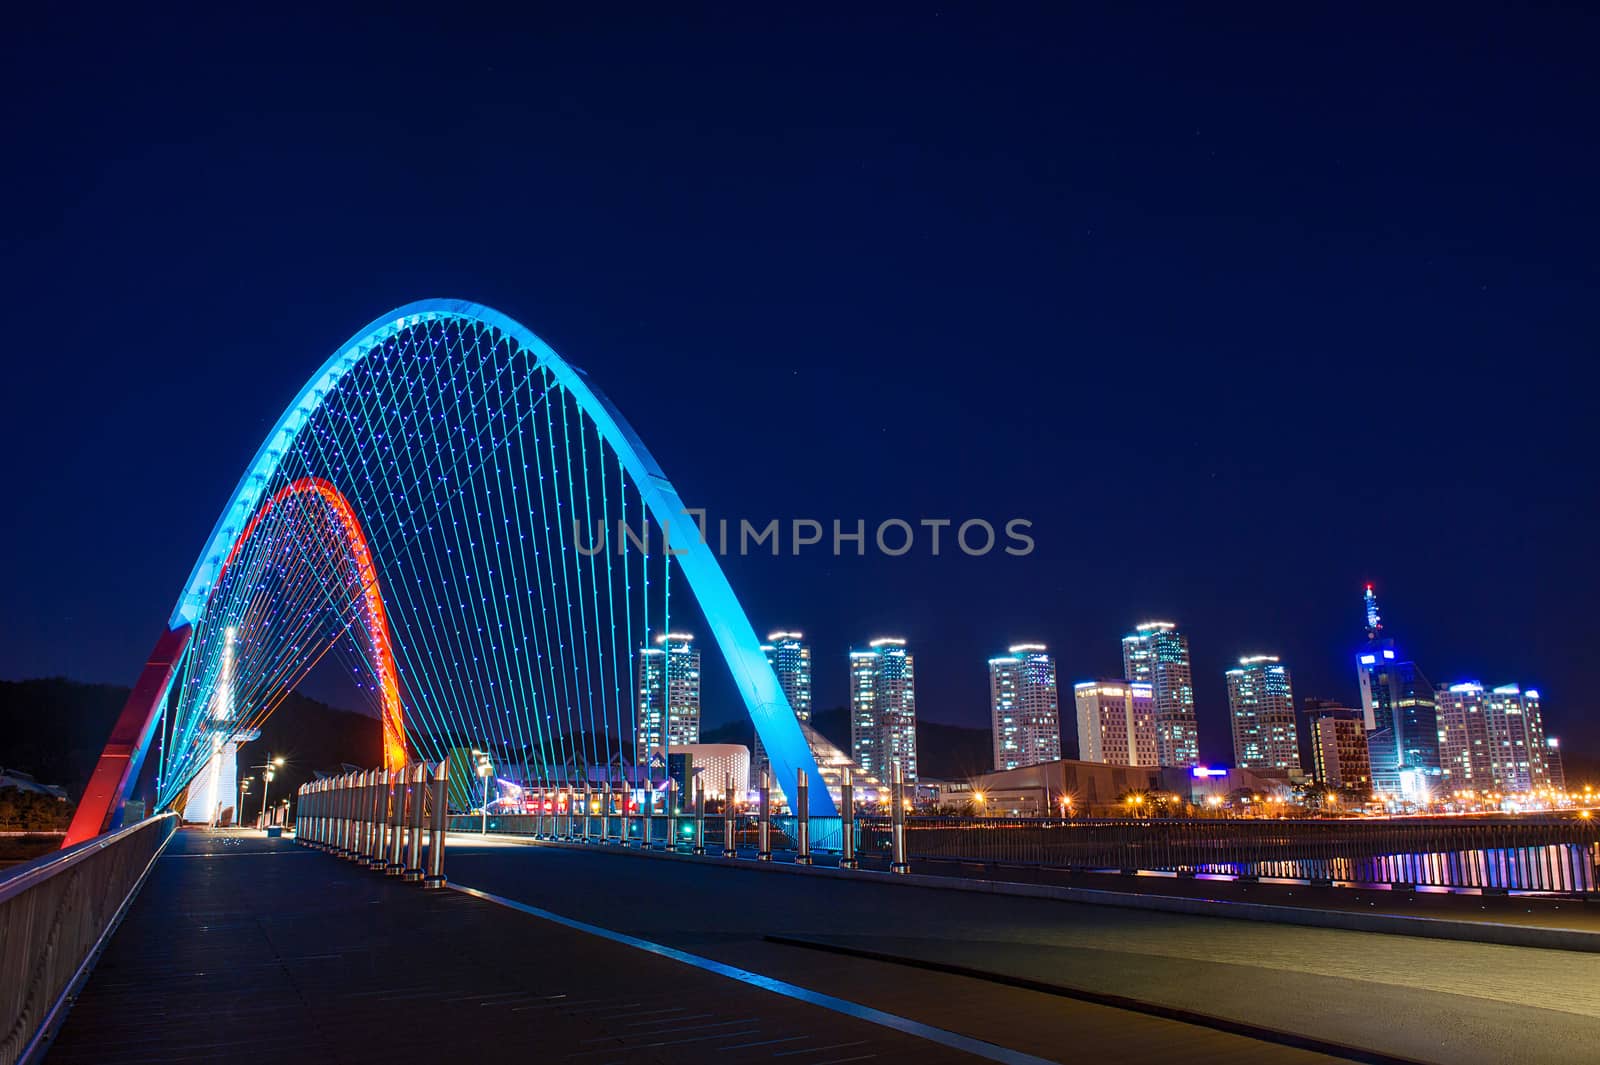 Expro bridge at night in daejeon,korea. by gutarphotoghaphy